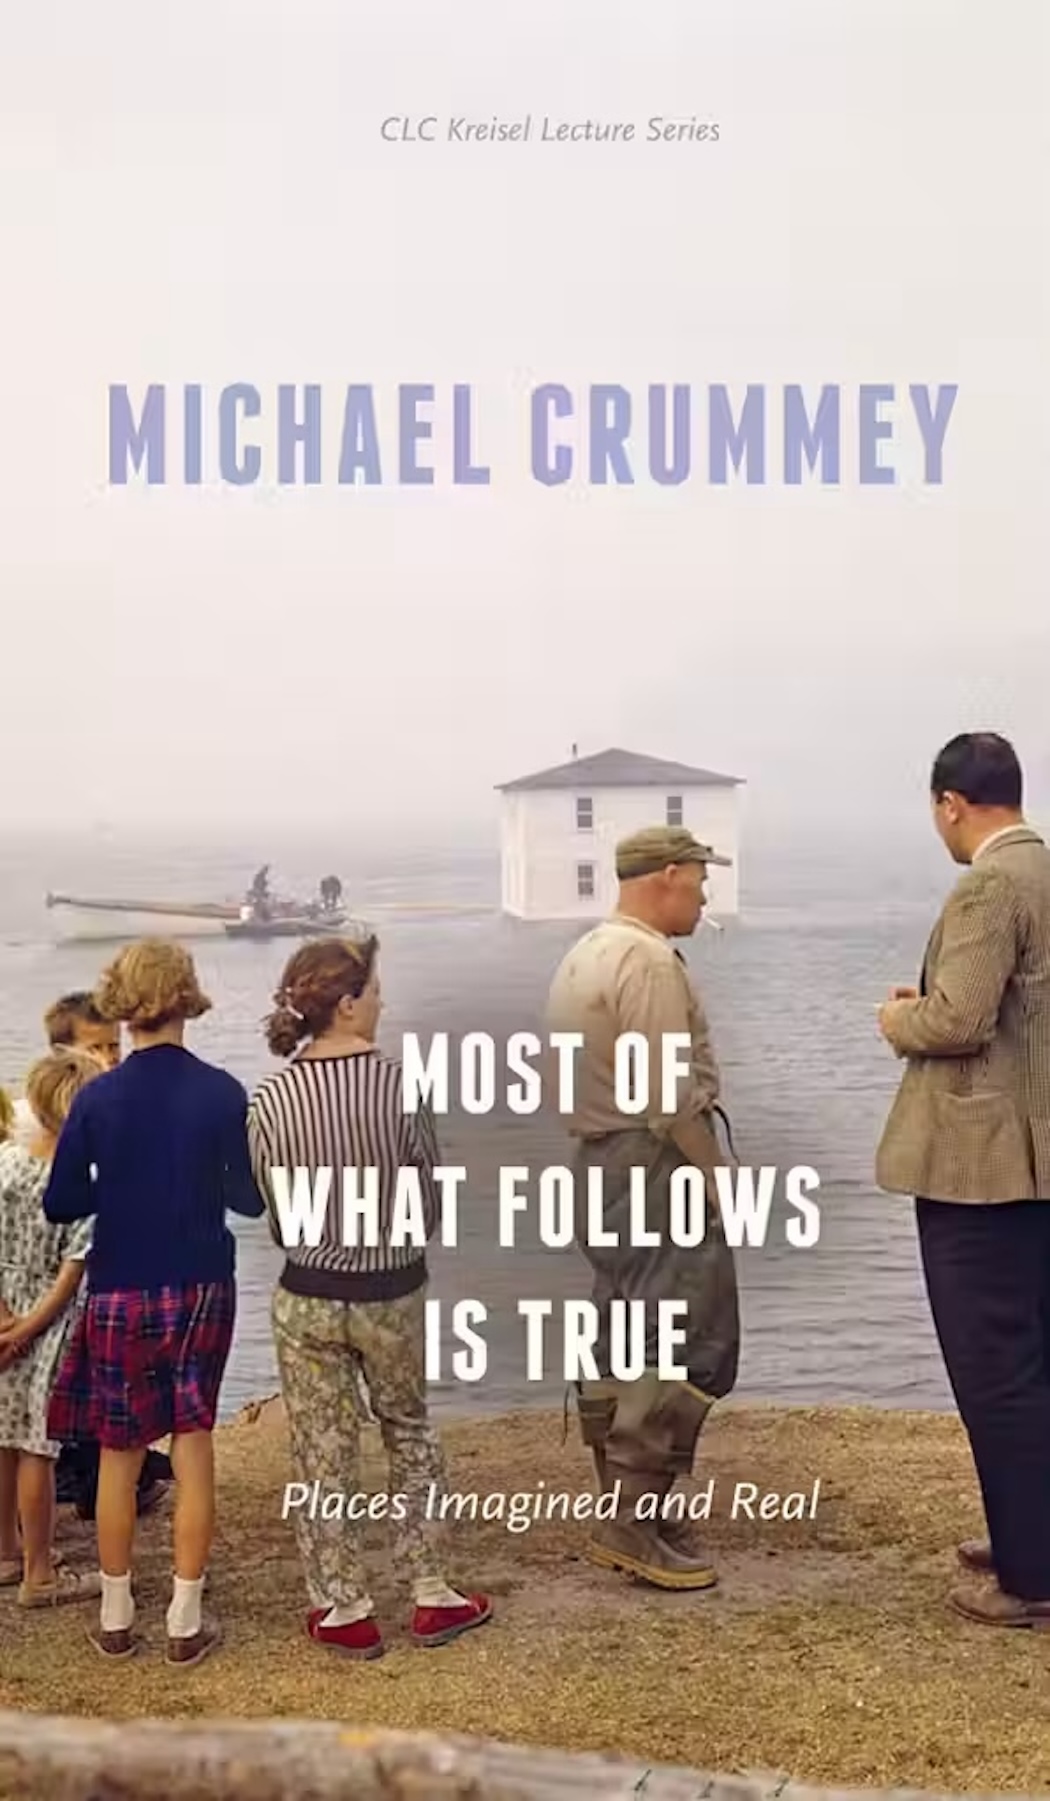 Cover Image of Michael Crummey's Kreisel Publication Titled Most of What Follows is True